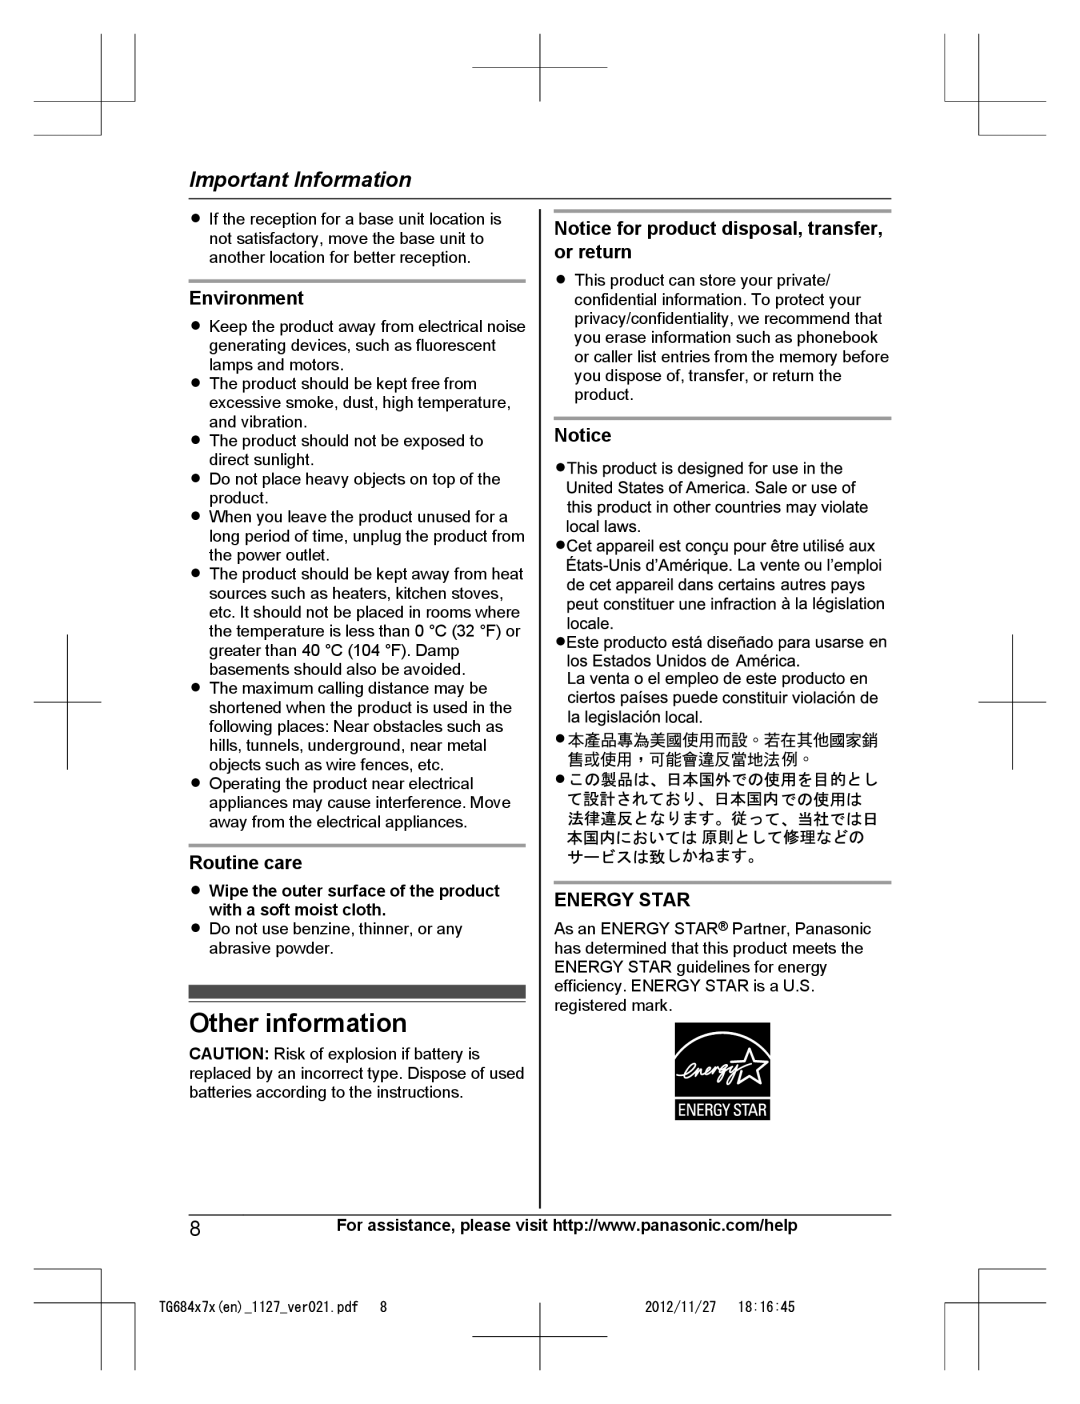 Panasonic KX-TG6842 Other information, Environment, Routine care, Notice for product disposal, transfer, or return 